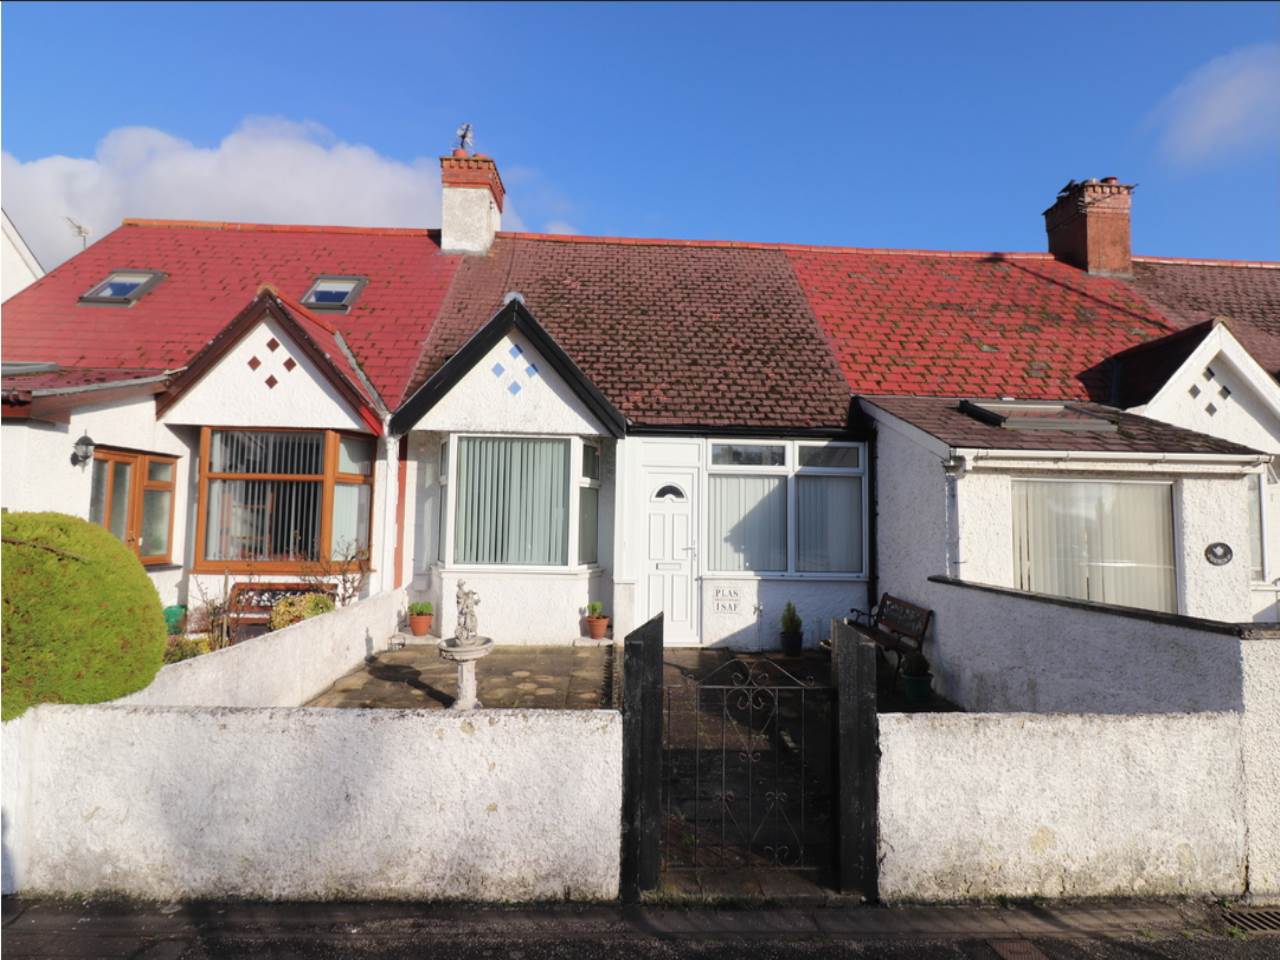 3 bed house for sale in Penparcau, Aberystwyth - Property Image 1